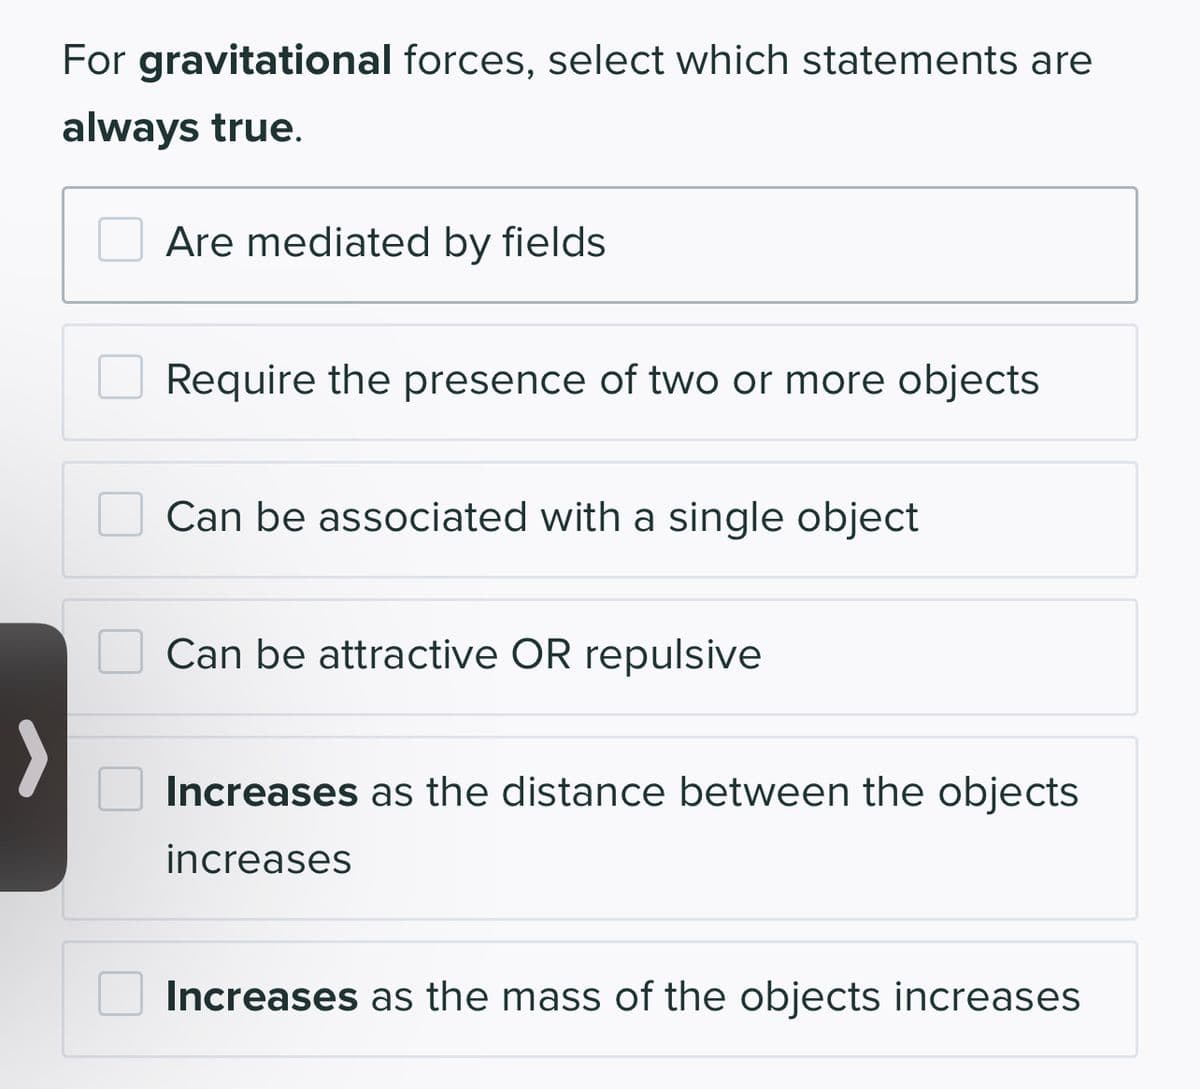 For gravitational forces, select which statements are
always true.
Are mediated by fields
Require the presence of two or more objects
Can be associated with a single object
Can be attractive OR repulsive
Increases as the distance between the objects
increases
Increases as the mass of the objects increases